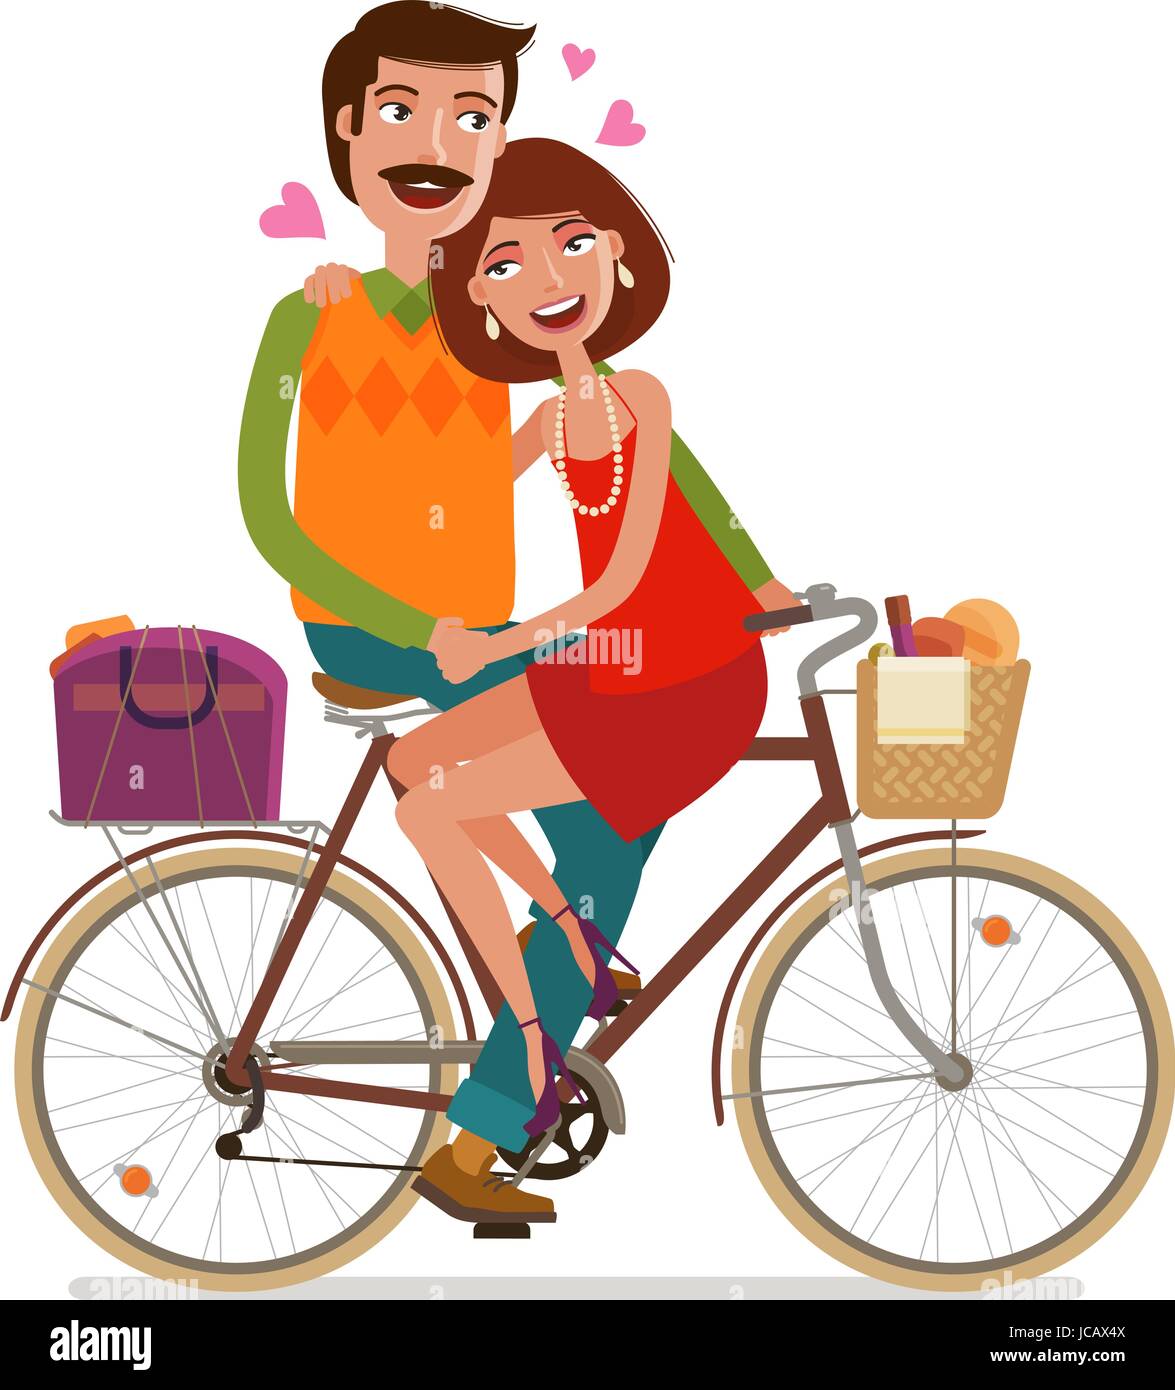 Loving couple riding on picnic by bicycle. Cartoon vector illustration Stock Vector